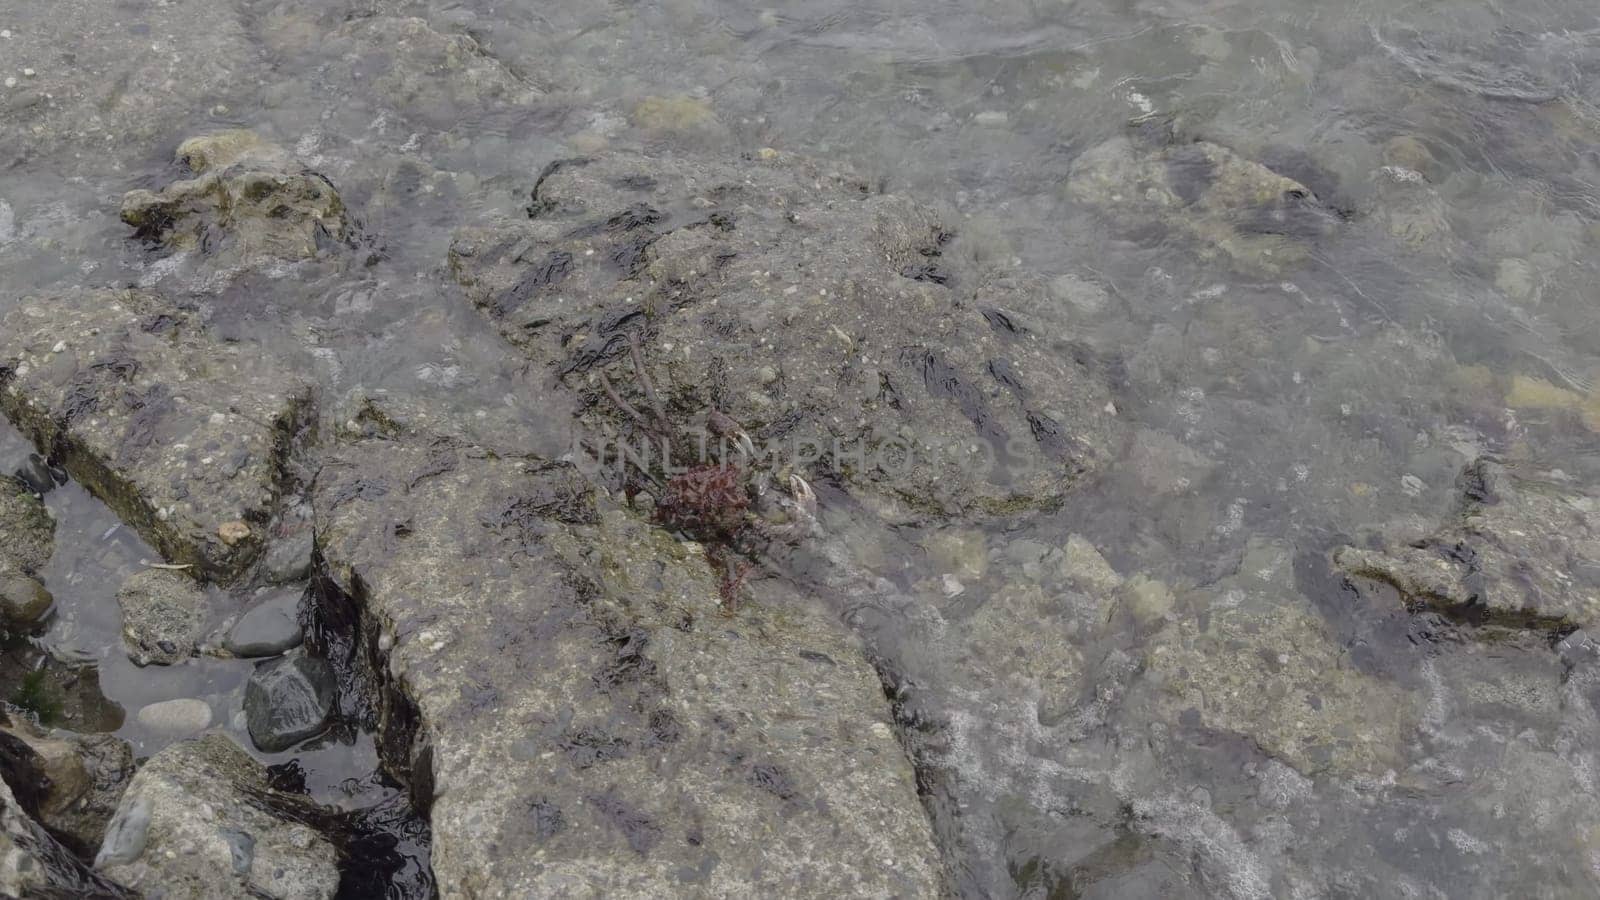 Slow-mo footage shows a camouflaged Magellanic king crab hiding among rocks and seaweed, poised for prey.